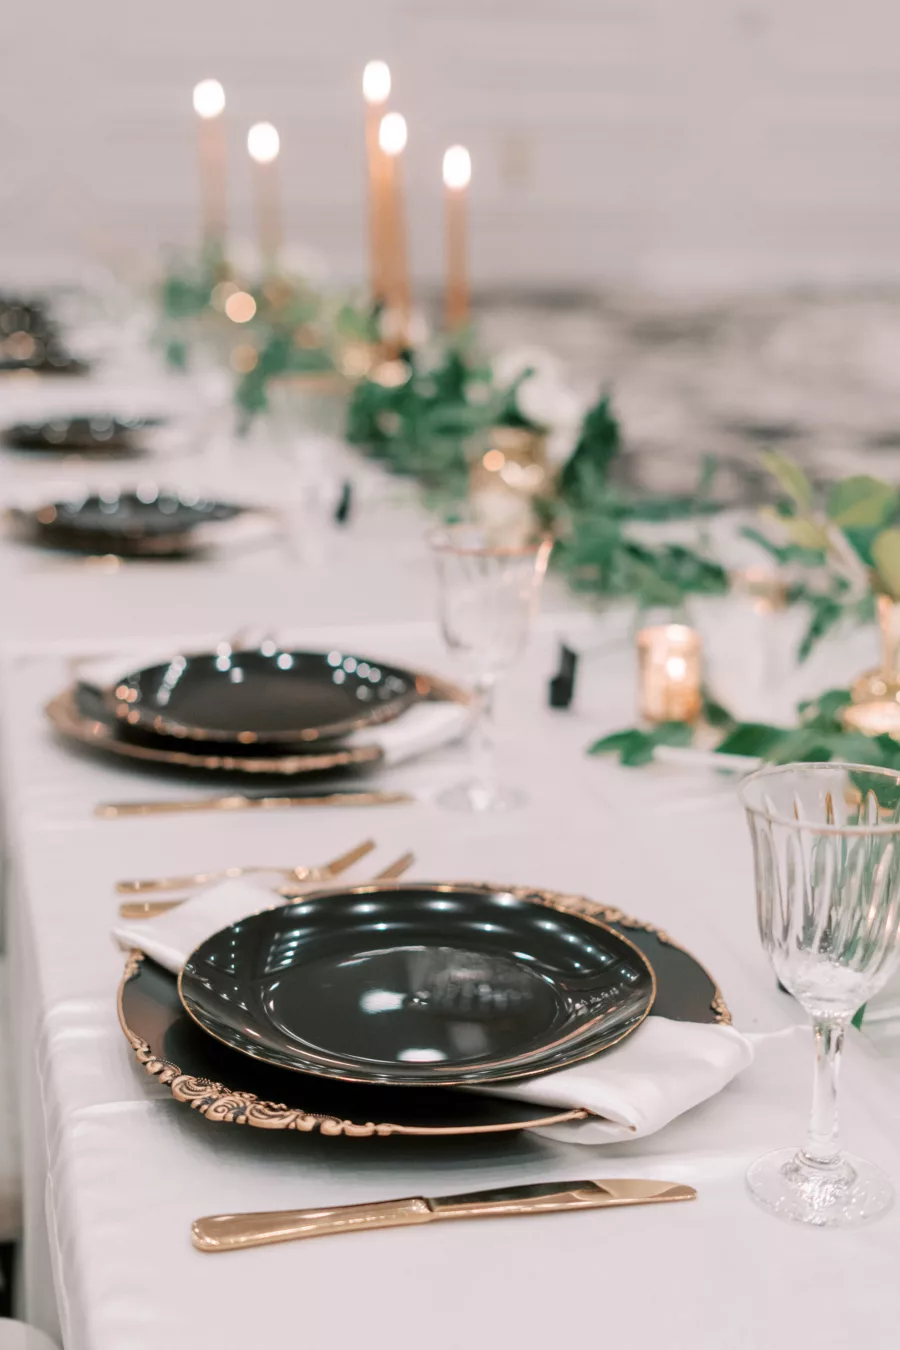 Great Gatsby Inspired Wedding Reception Head Table Tablescape Ideas | Black and Gold Vintage Chargers | Gold Flatware | White Roses, Hydrangeas, Stock Flowers, and Feathers Centerpiece Inspiration | Tampa Bay Outside The Box Rentals